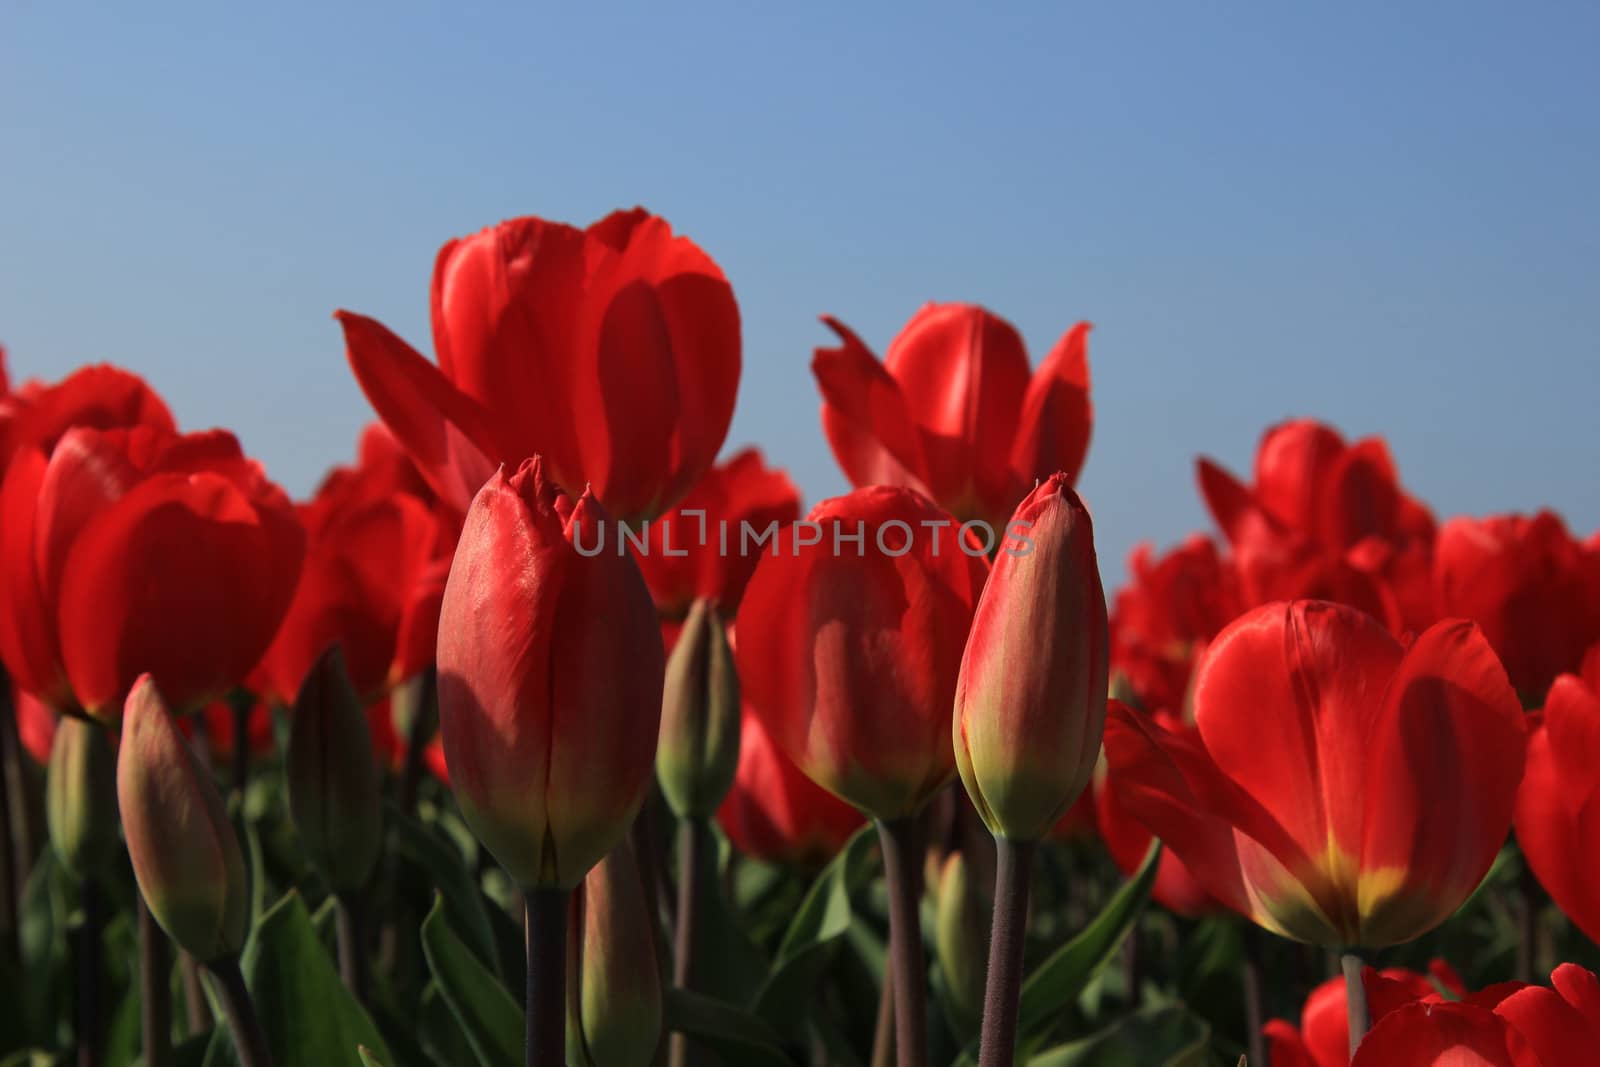 Red tulips growing in a field and a clear blue sky